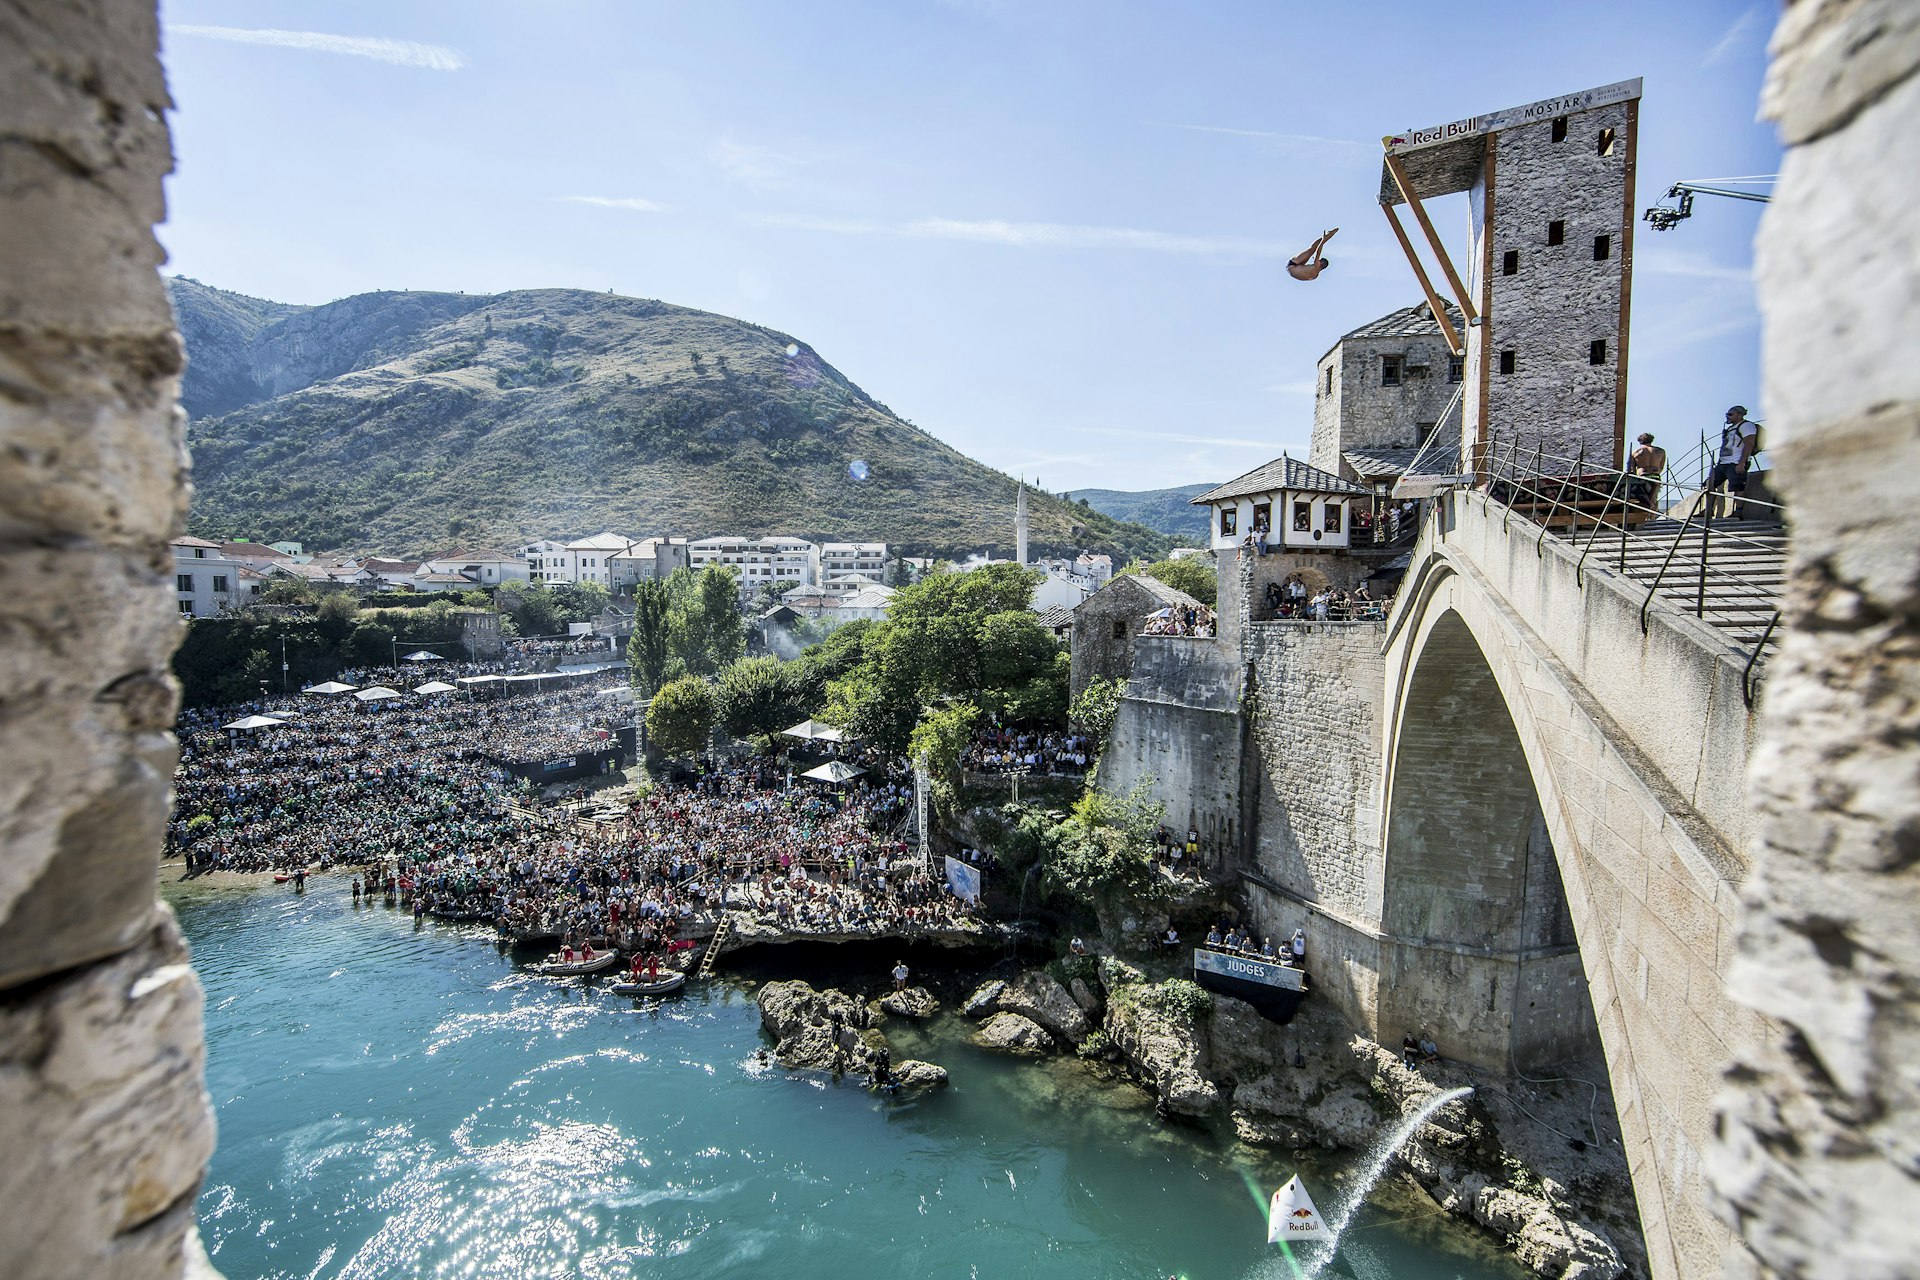 A diver during Red Bull Cliff Diving World Series, Mostar, Bosnia and Herzegovina